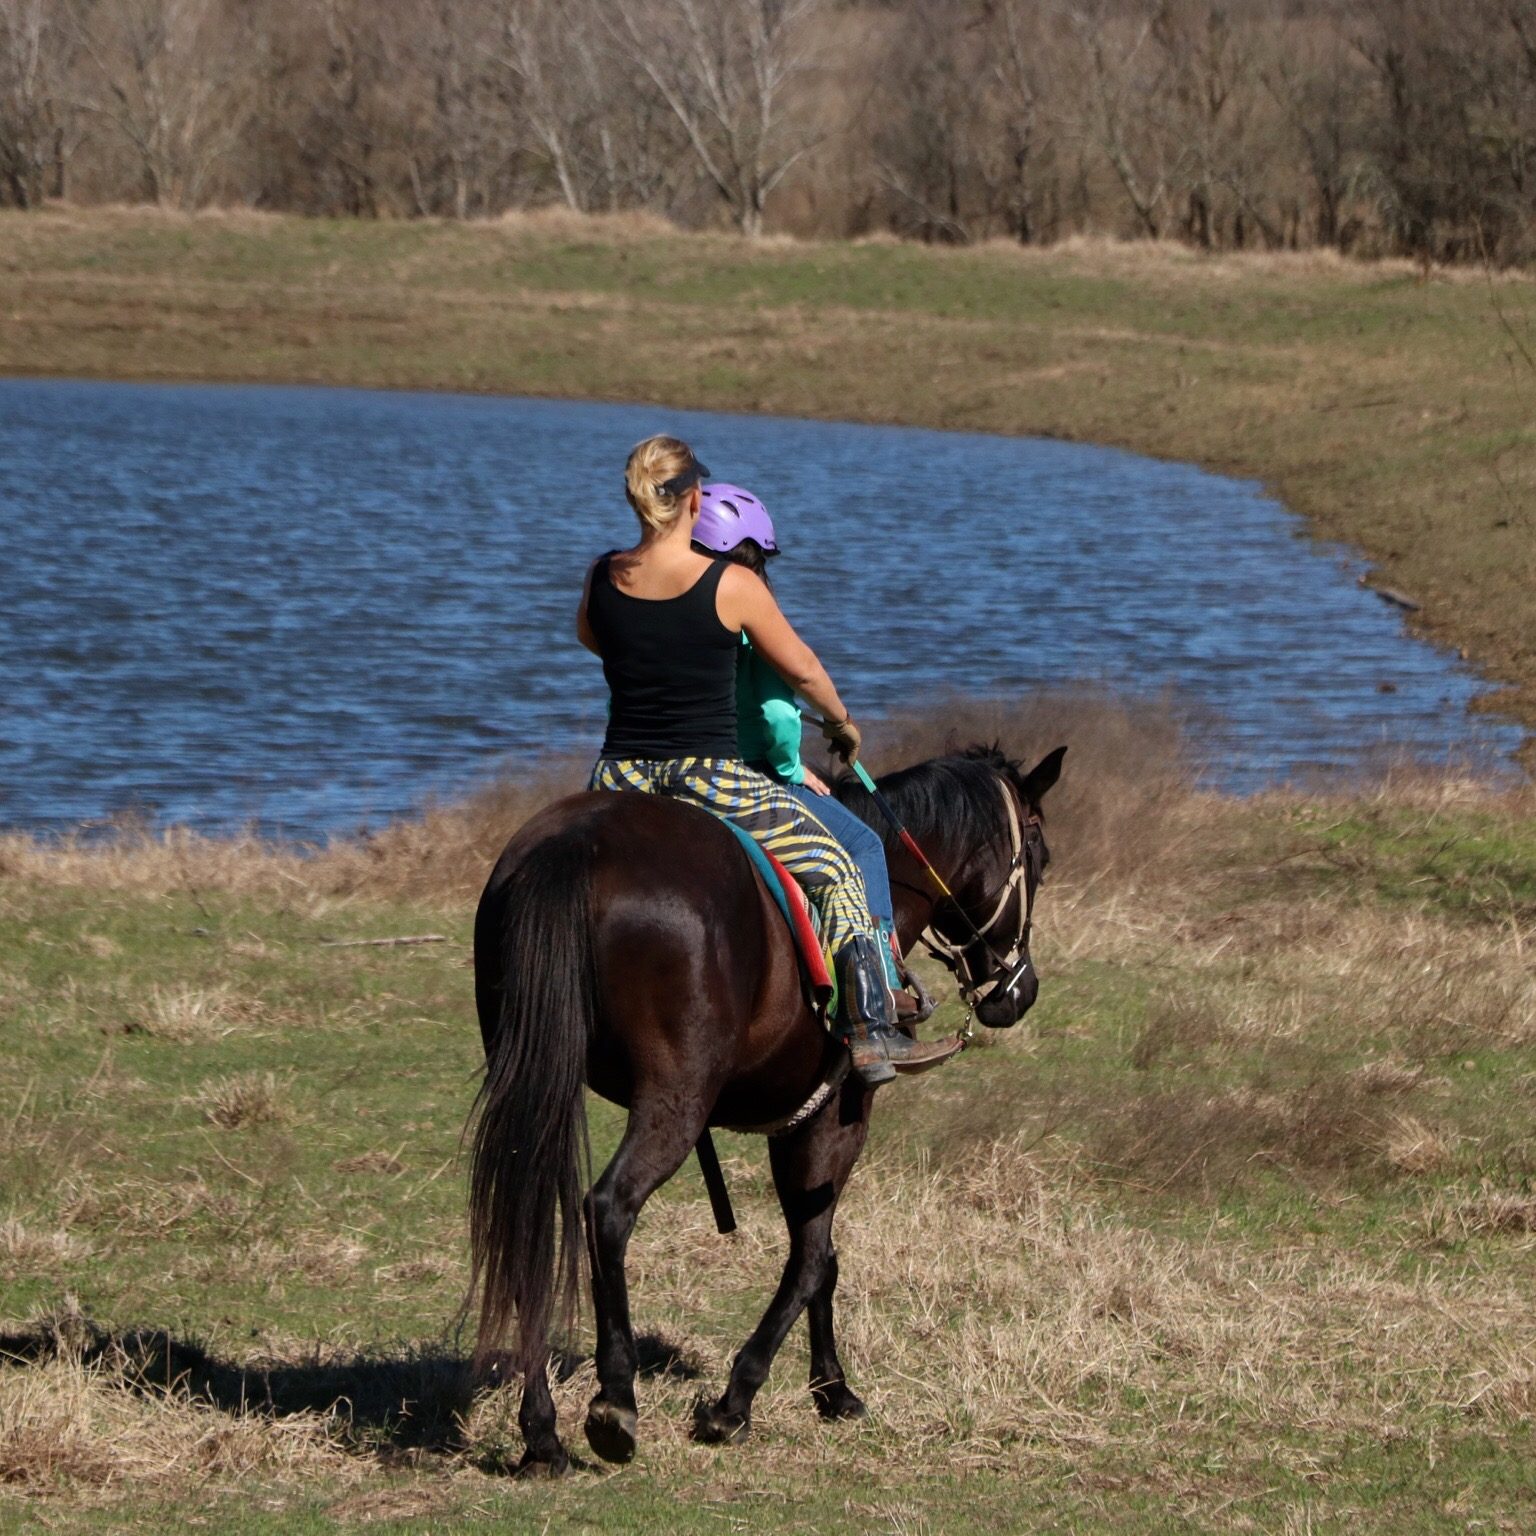 horse trainer MacCoy rides black horse in front of large pond with equestrian riding student